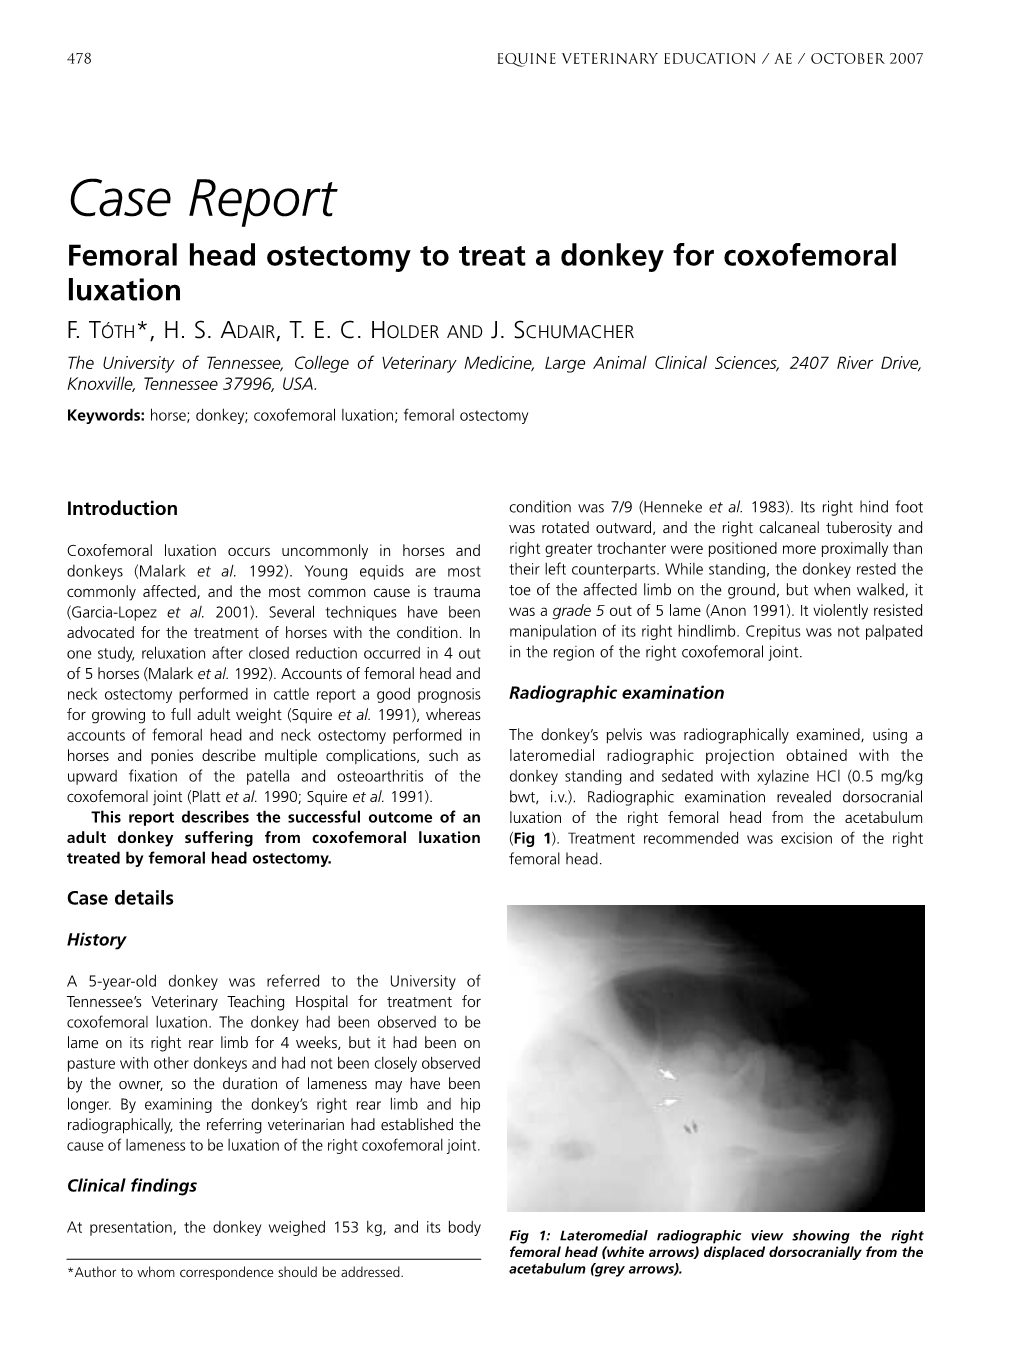 Case Report Femoral Head Ostectomy to Treat a Donkey for Coxofemoral Luxation F